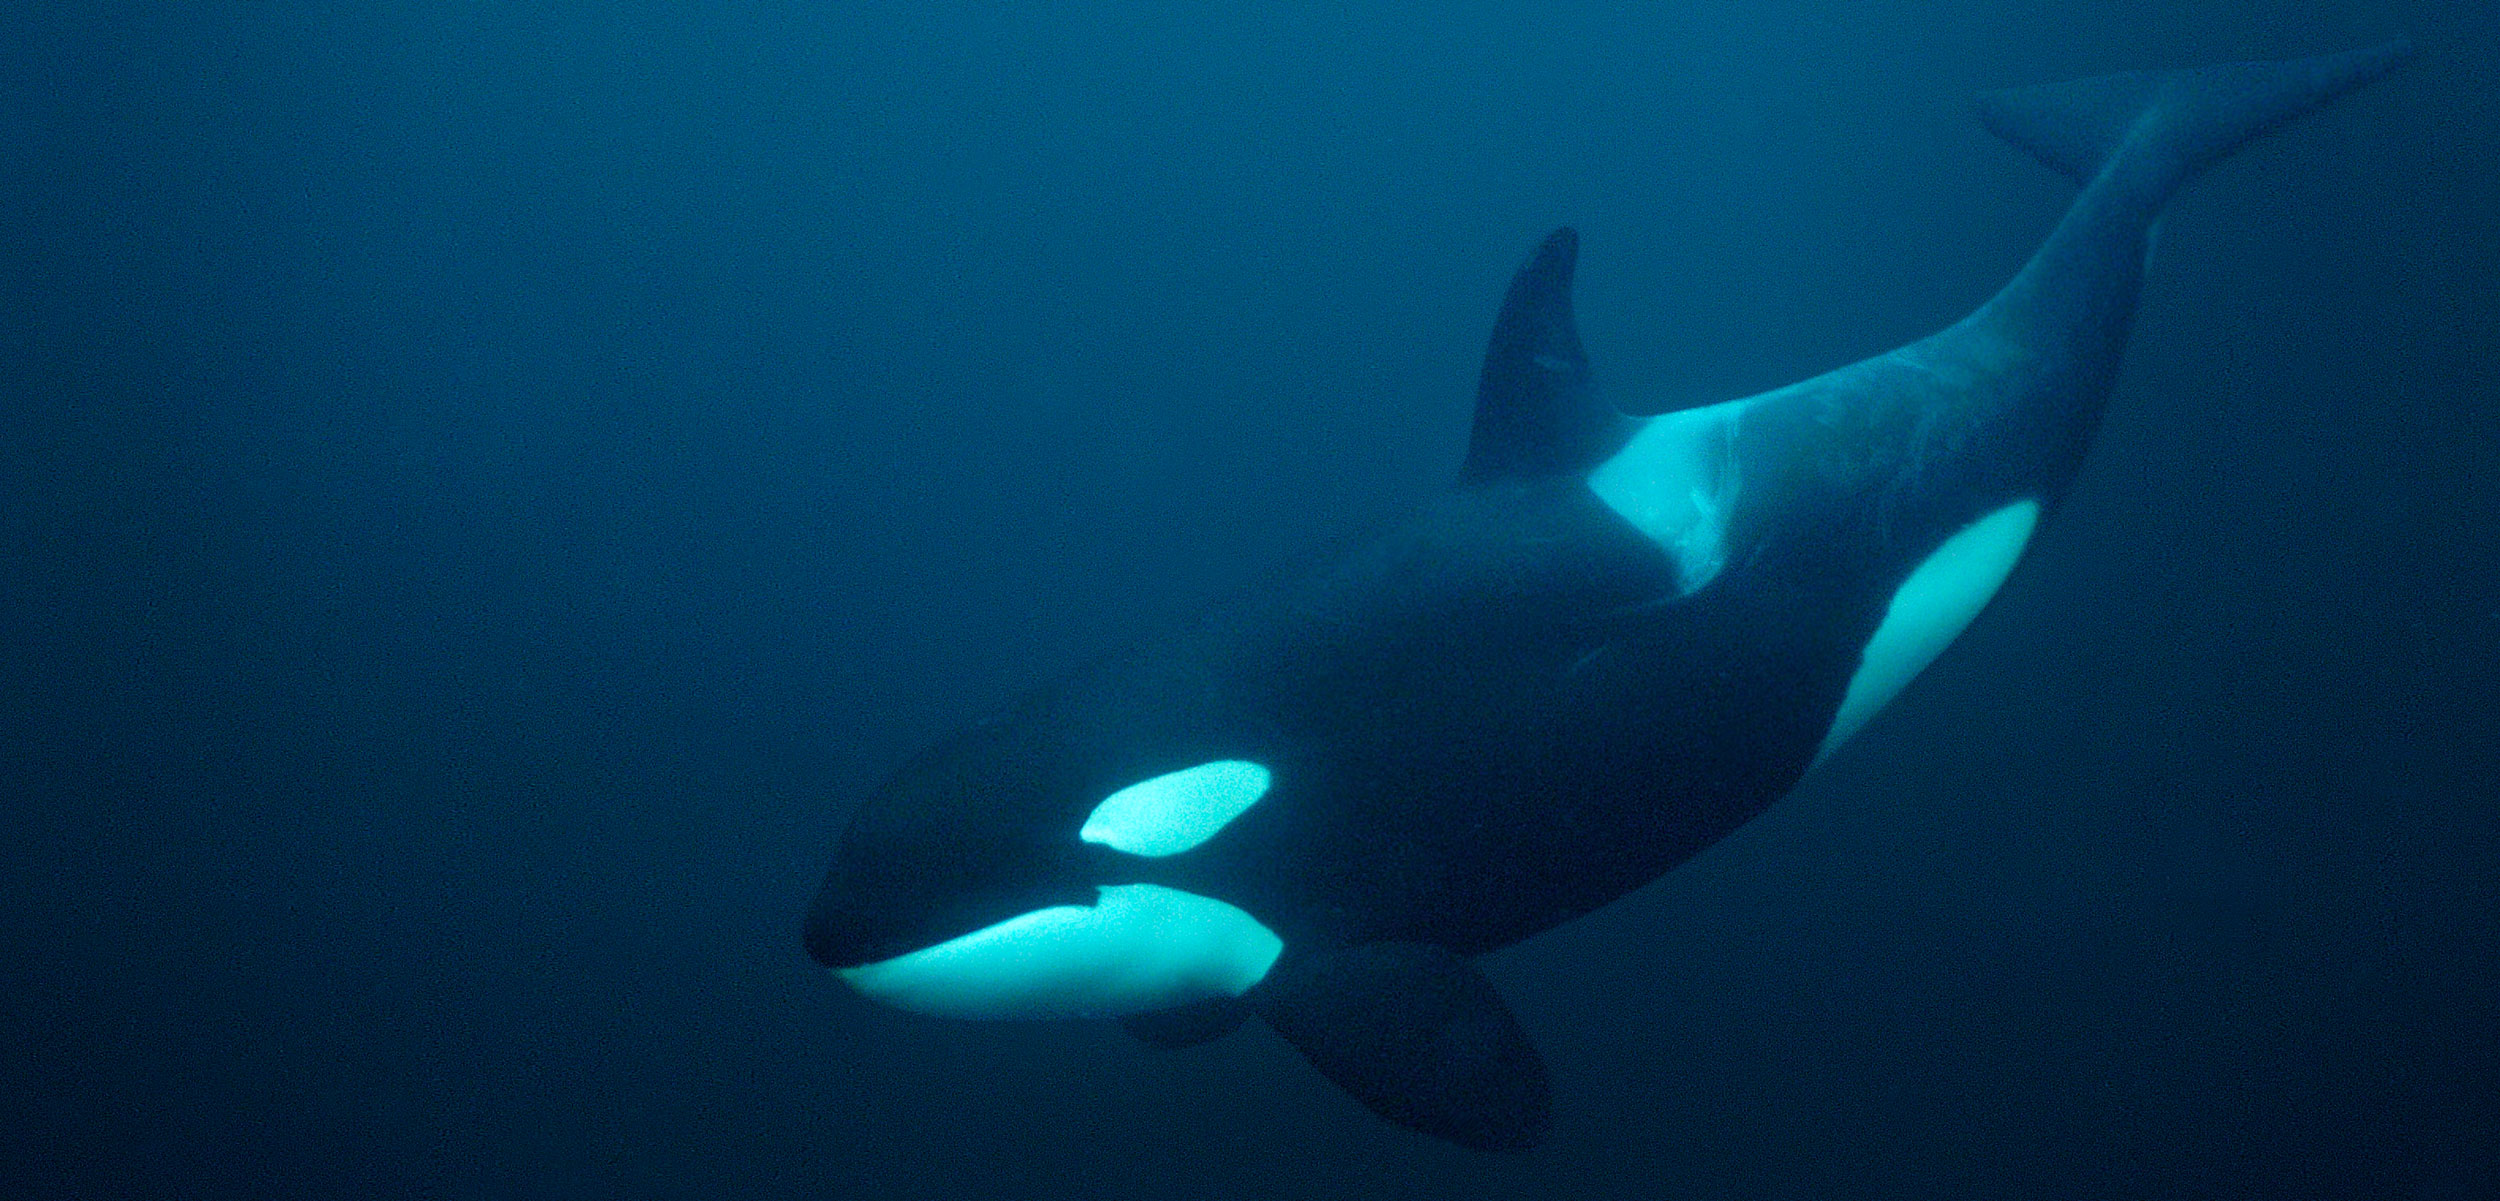 A Record-Breaking Dive by a Hungry Killer Whale | Hakai Magazine